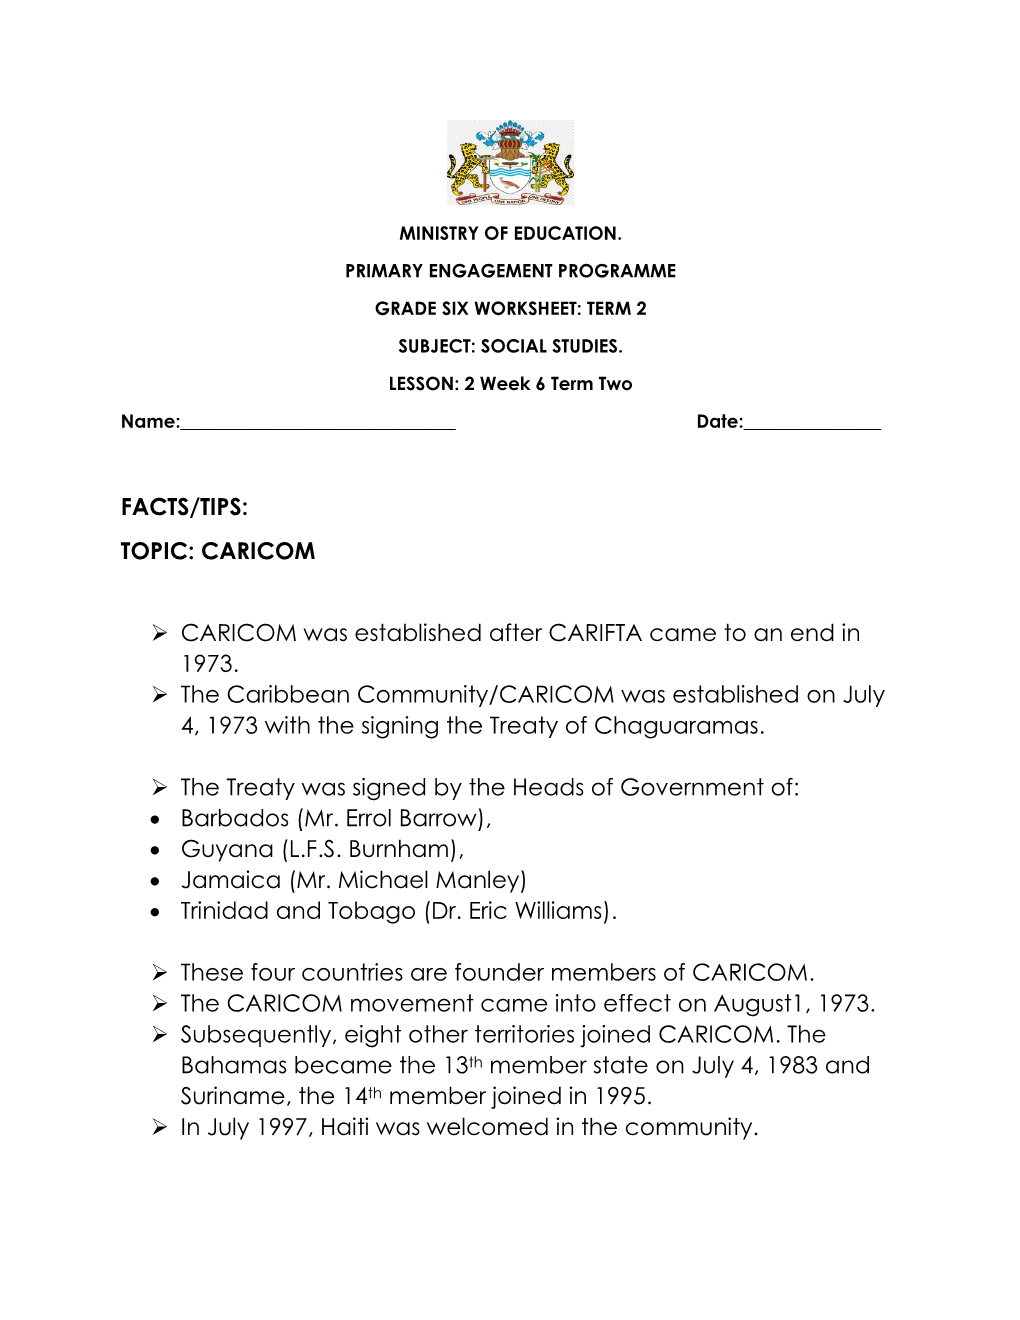 Facts/Tips: Topic: Caricom